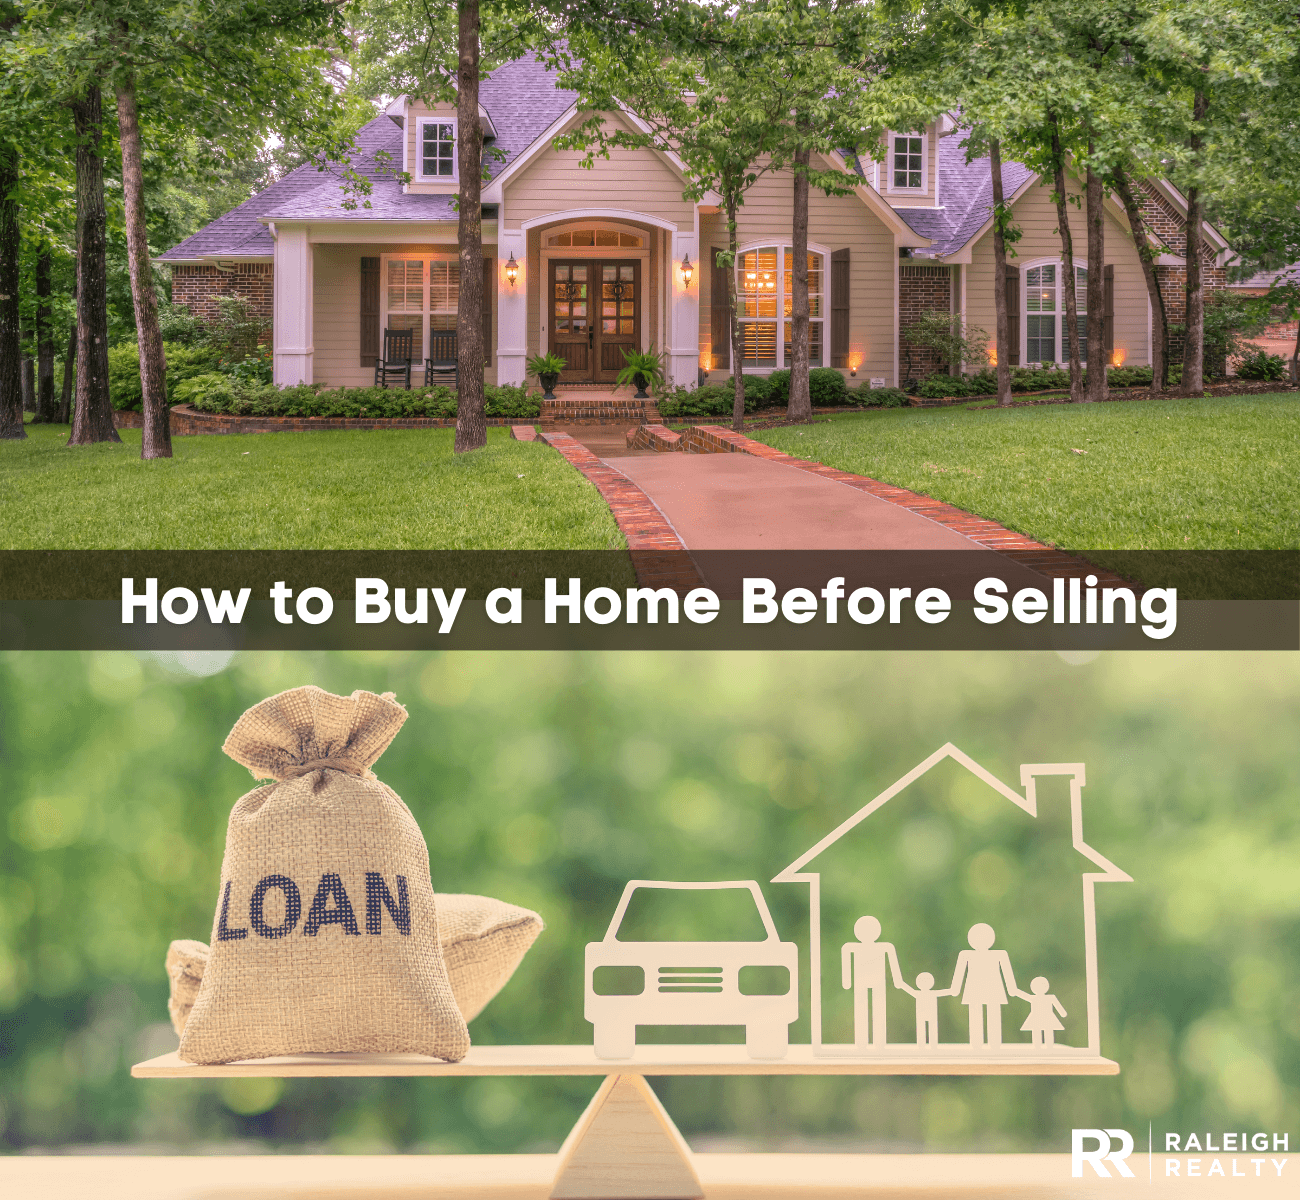 How to Buy a House Before Selling the One You Live In